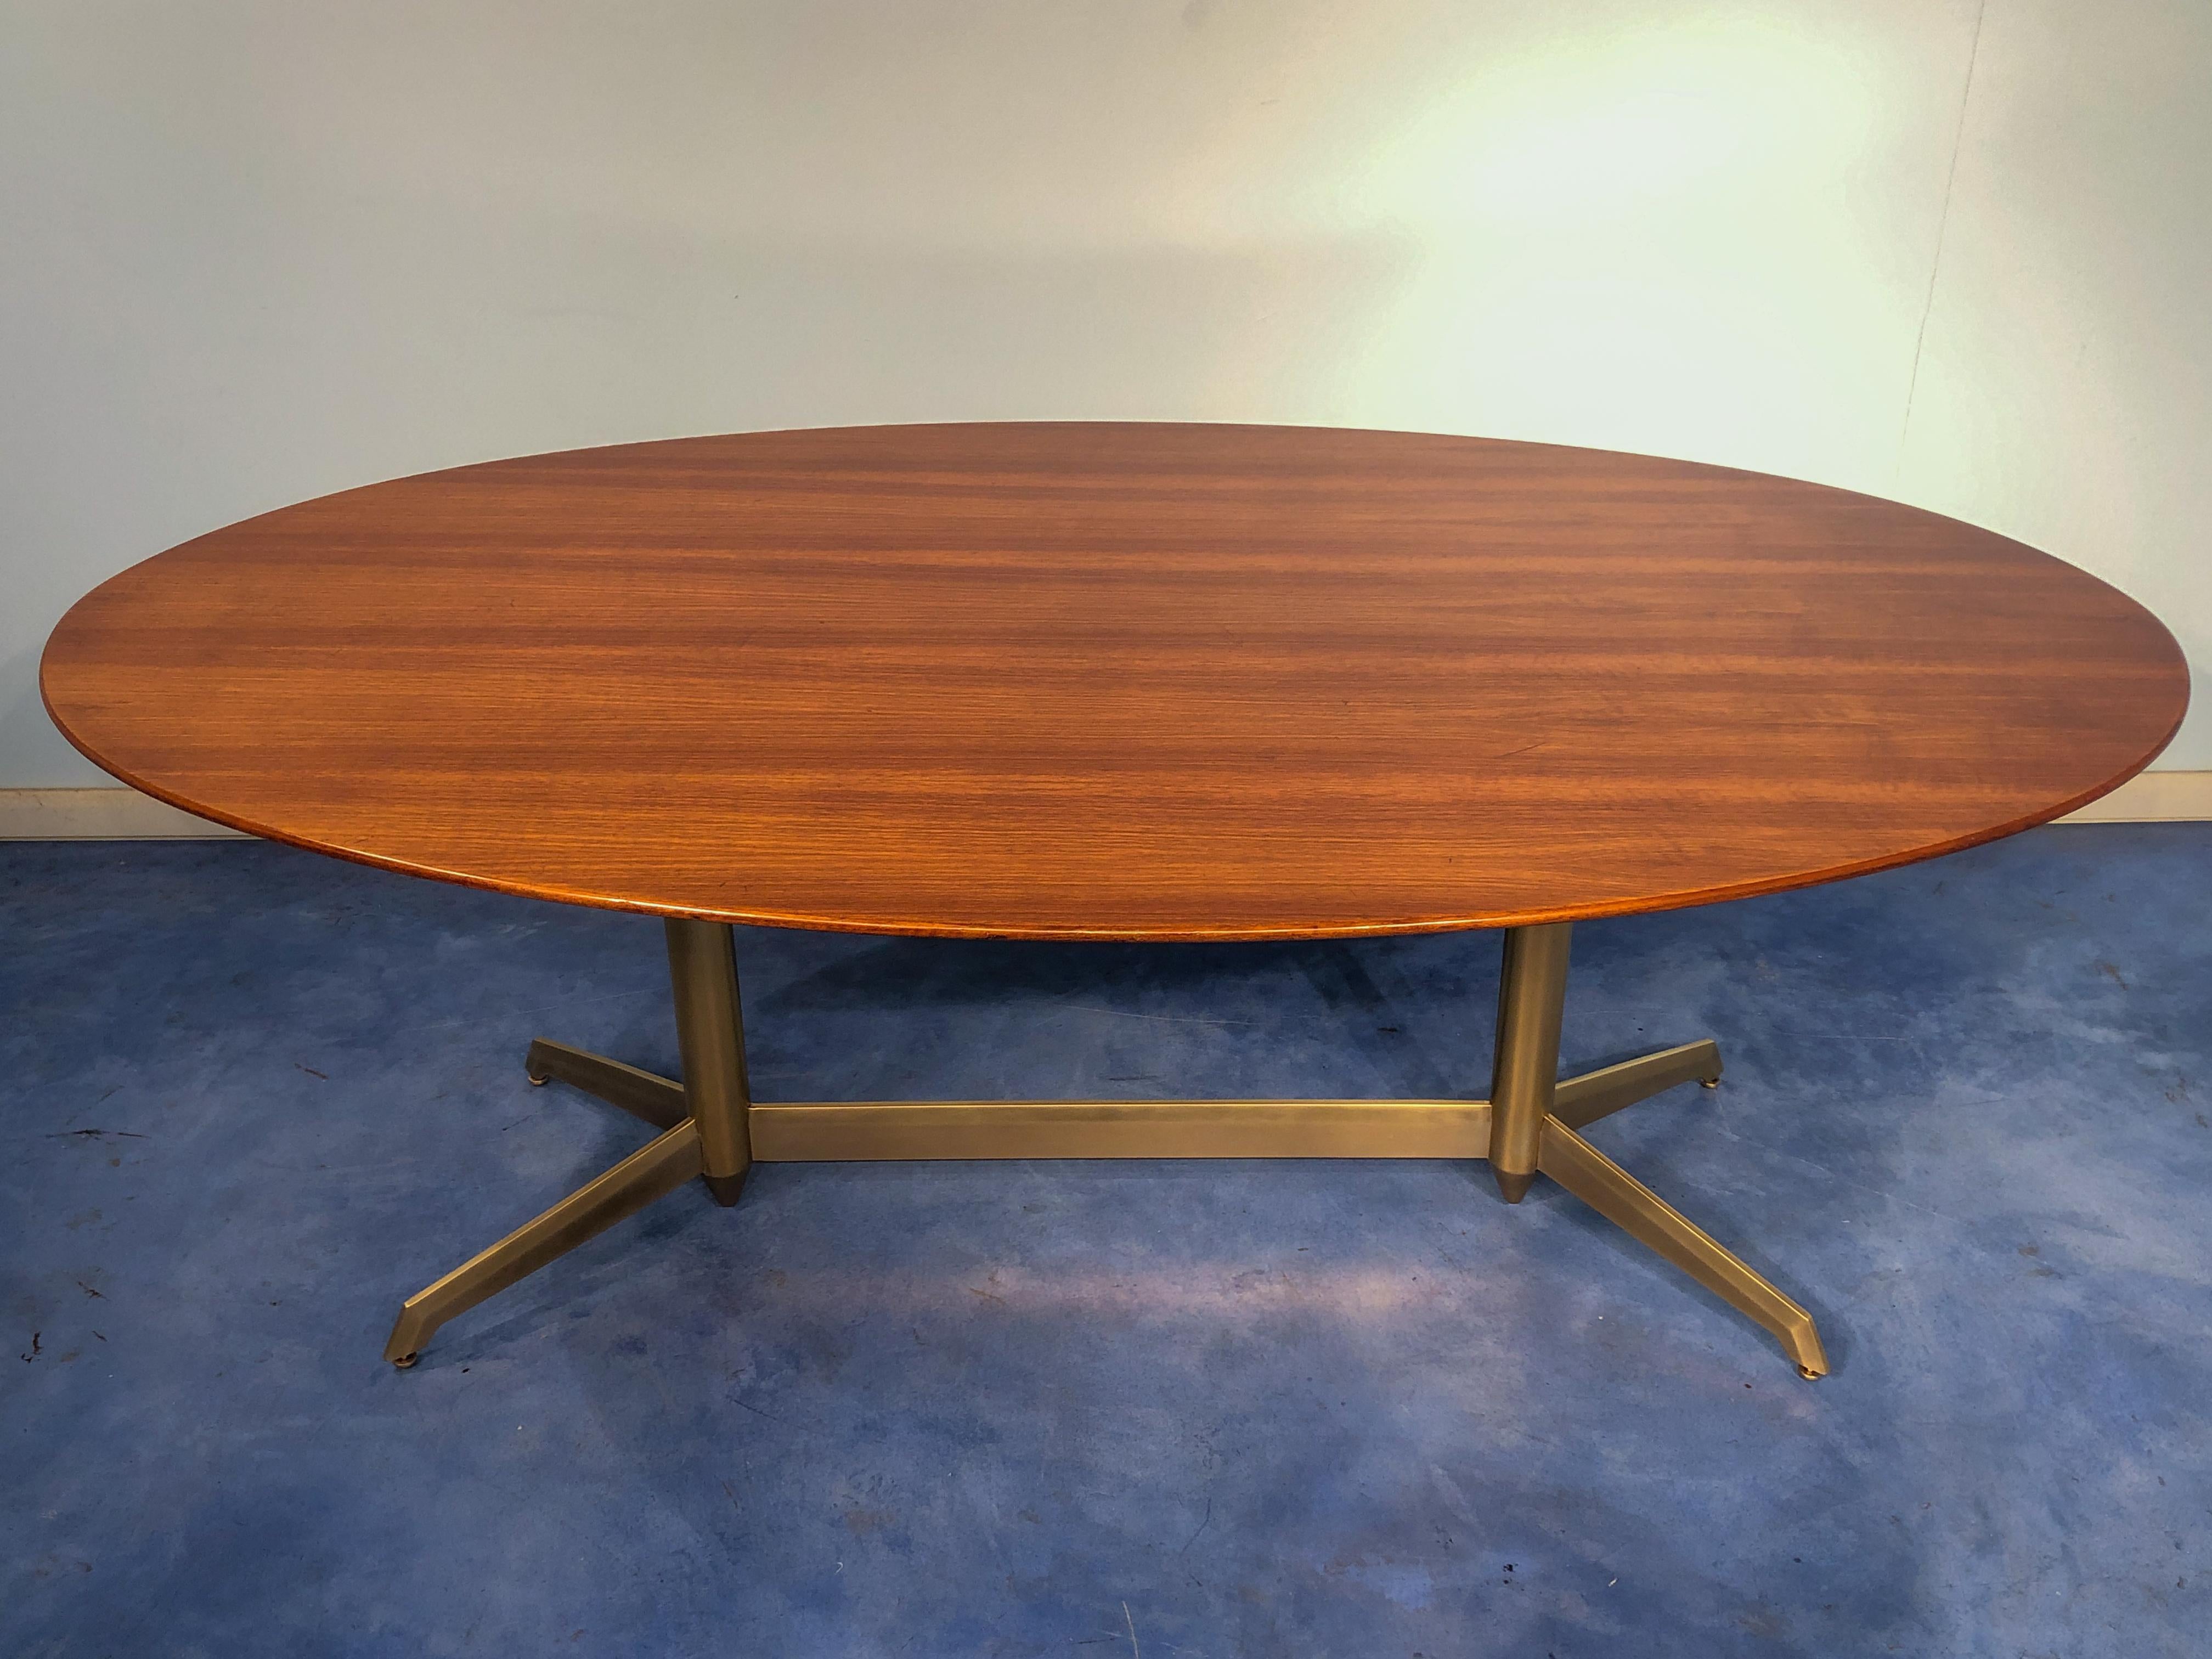 Fantastic shaped Italian midcentury oval dining table, 1950.
The base frame is totally made in precious stained brass with line feet truly unique, a sign of a high-level commission.
The top has a really elegant oval shape with a superb walnut